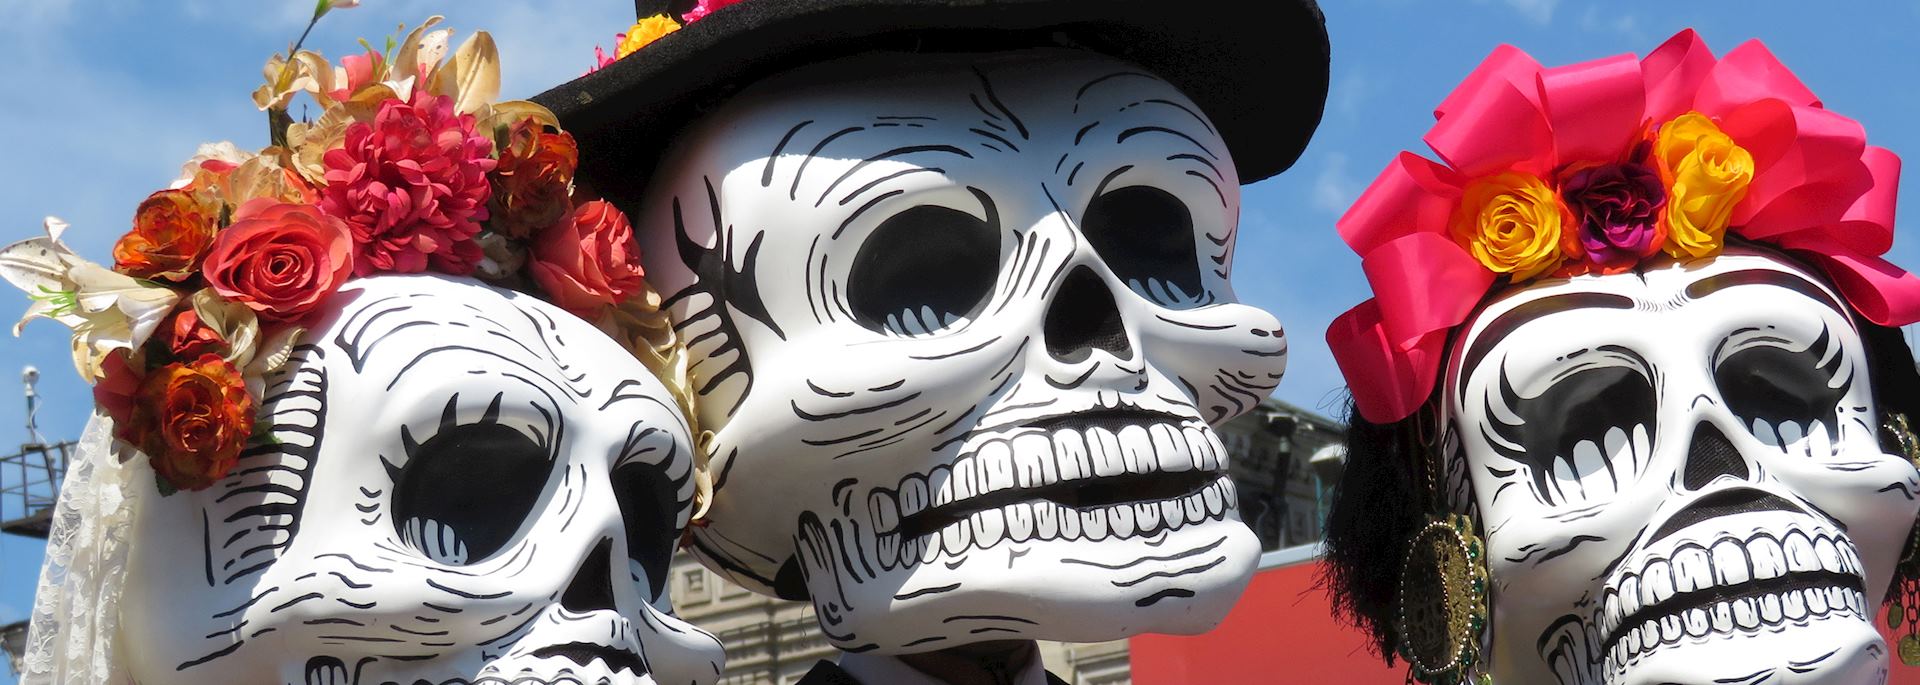 Day of the Dead, Mexico City